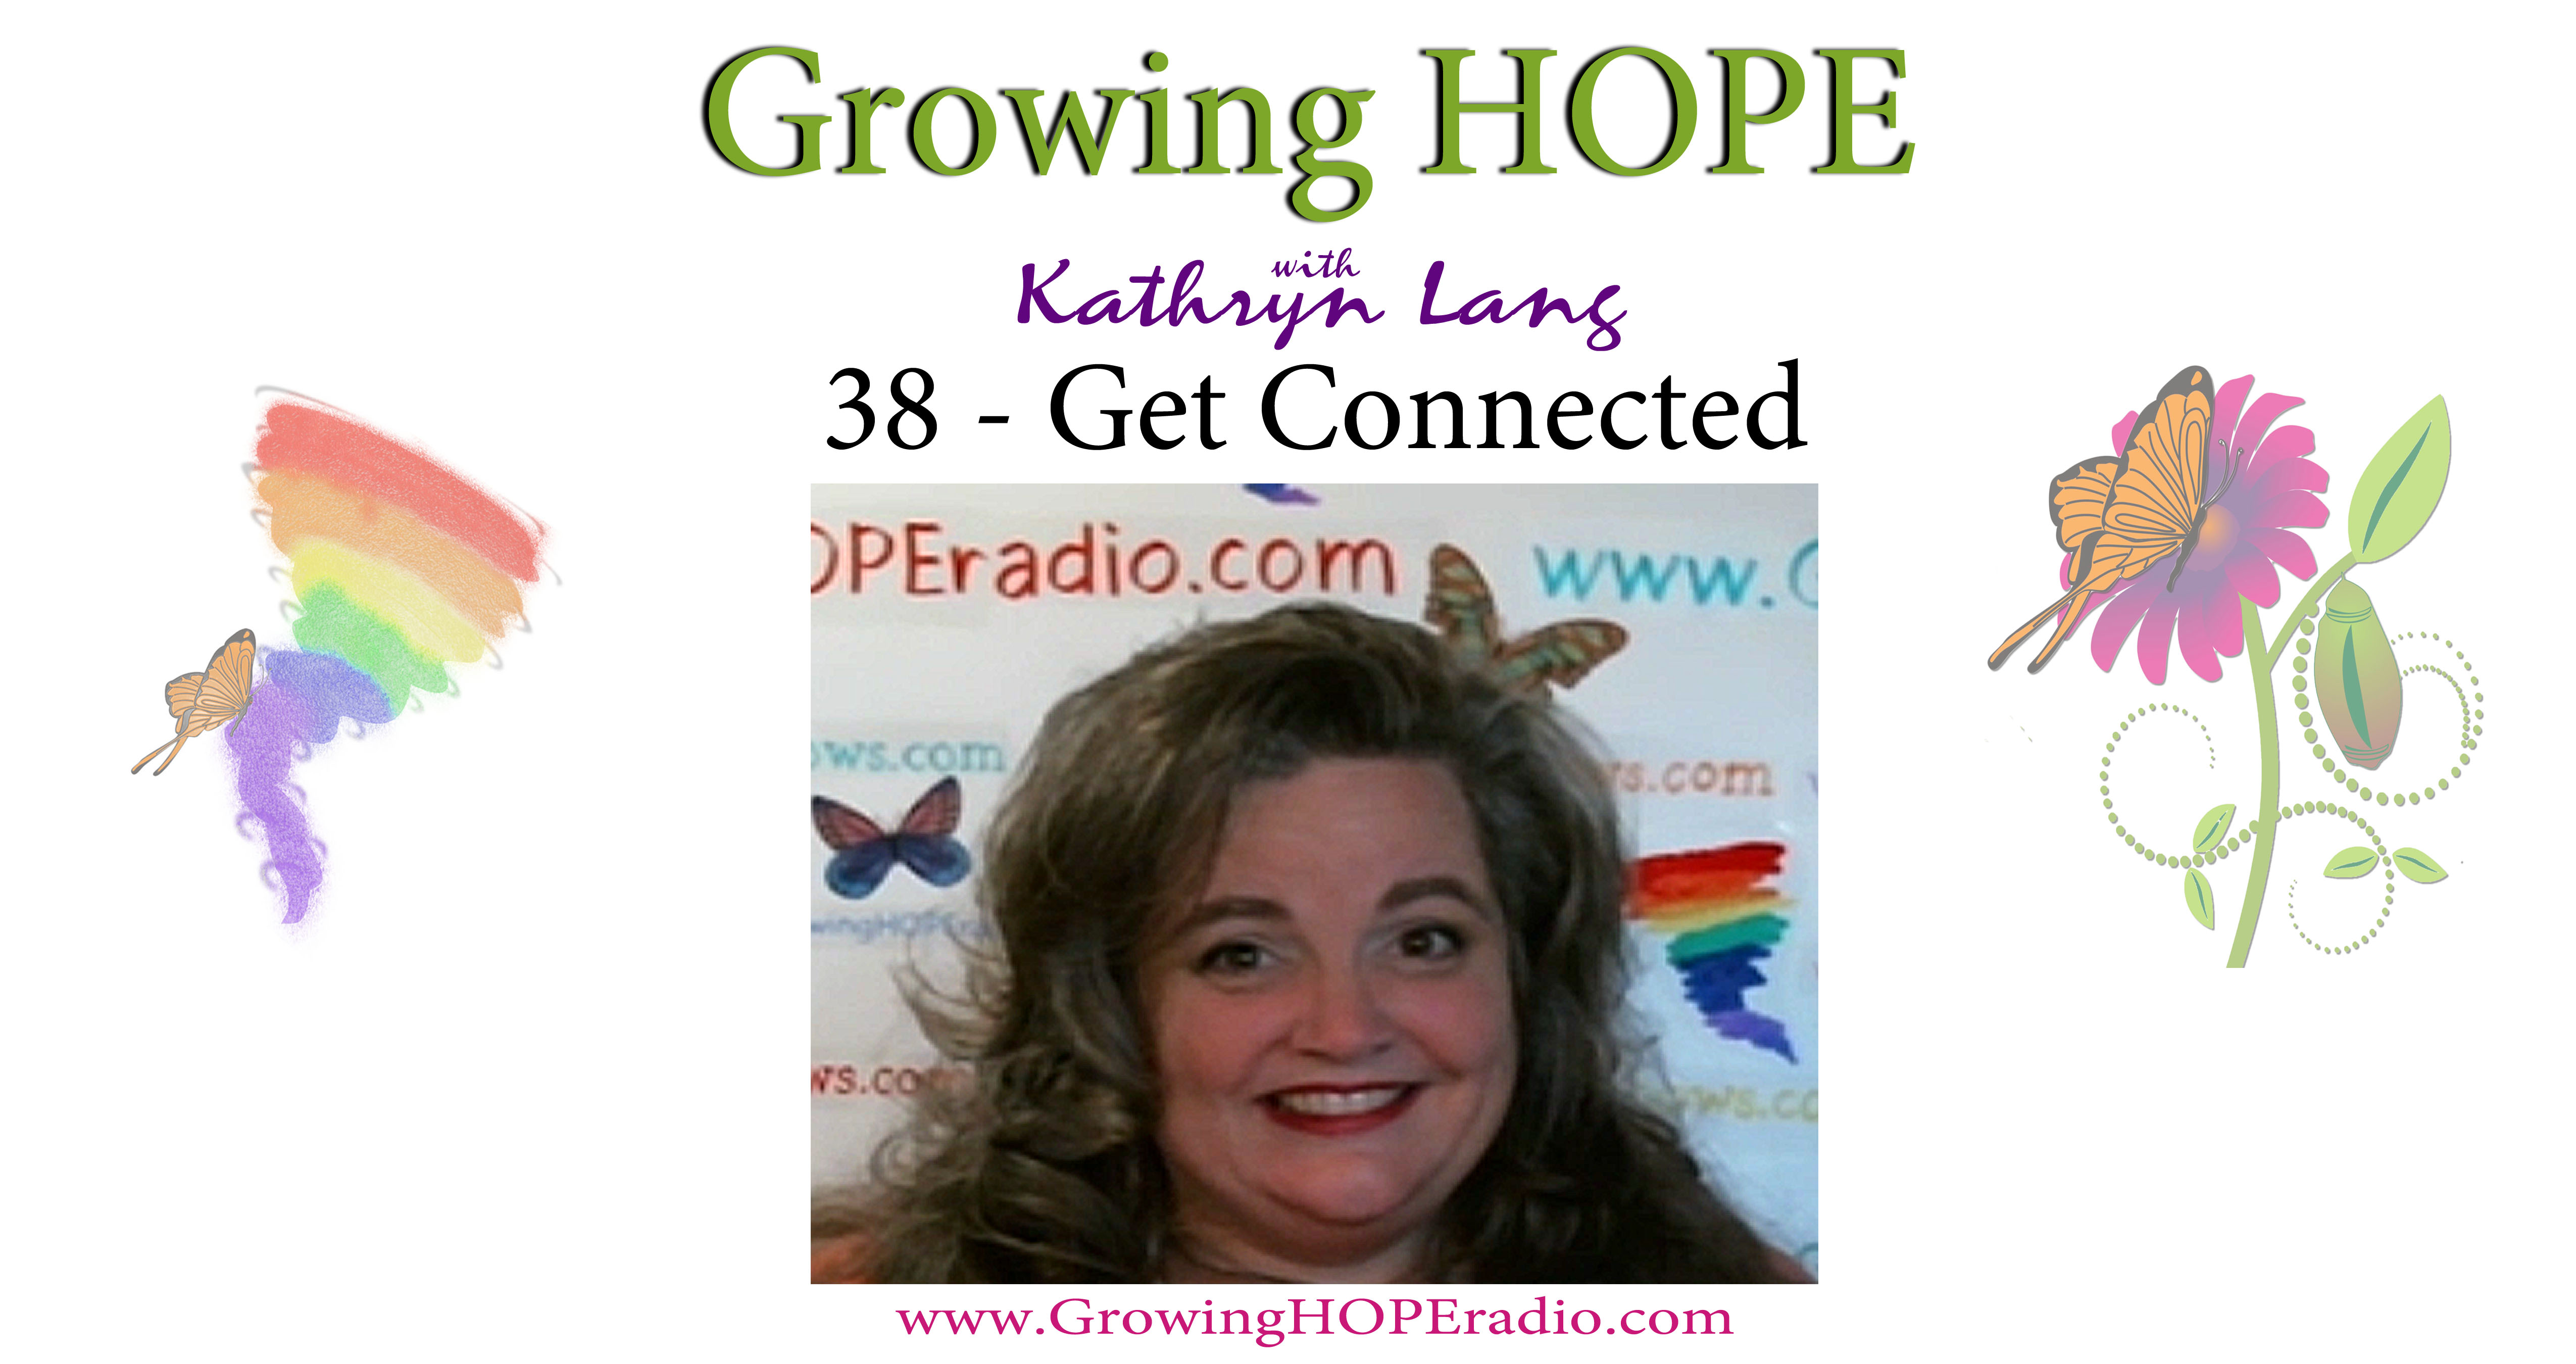 #GrowingHOPE daily - 38 - get connected